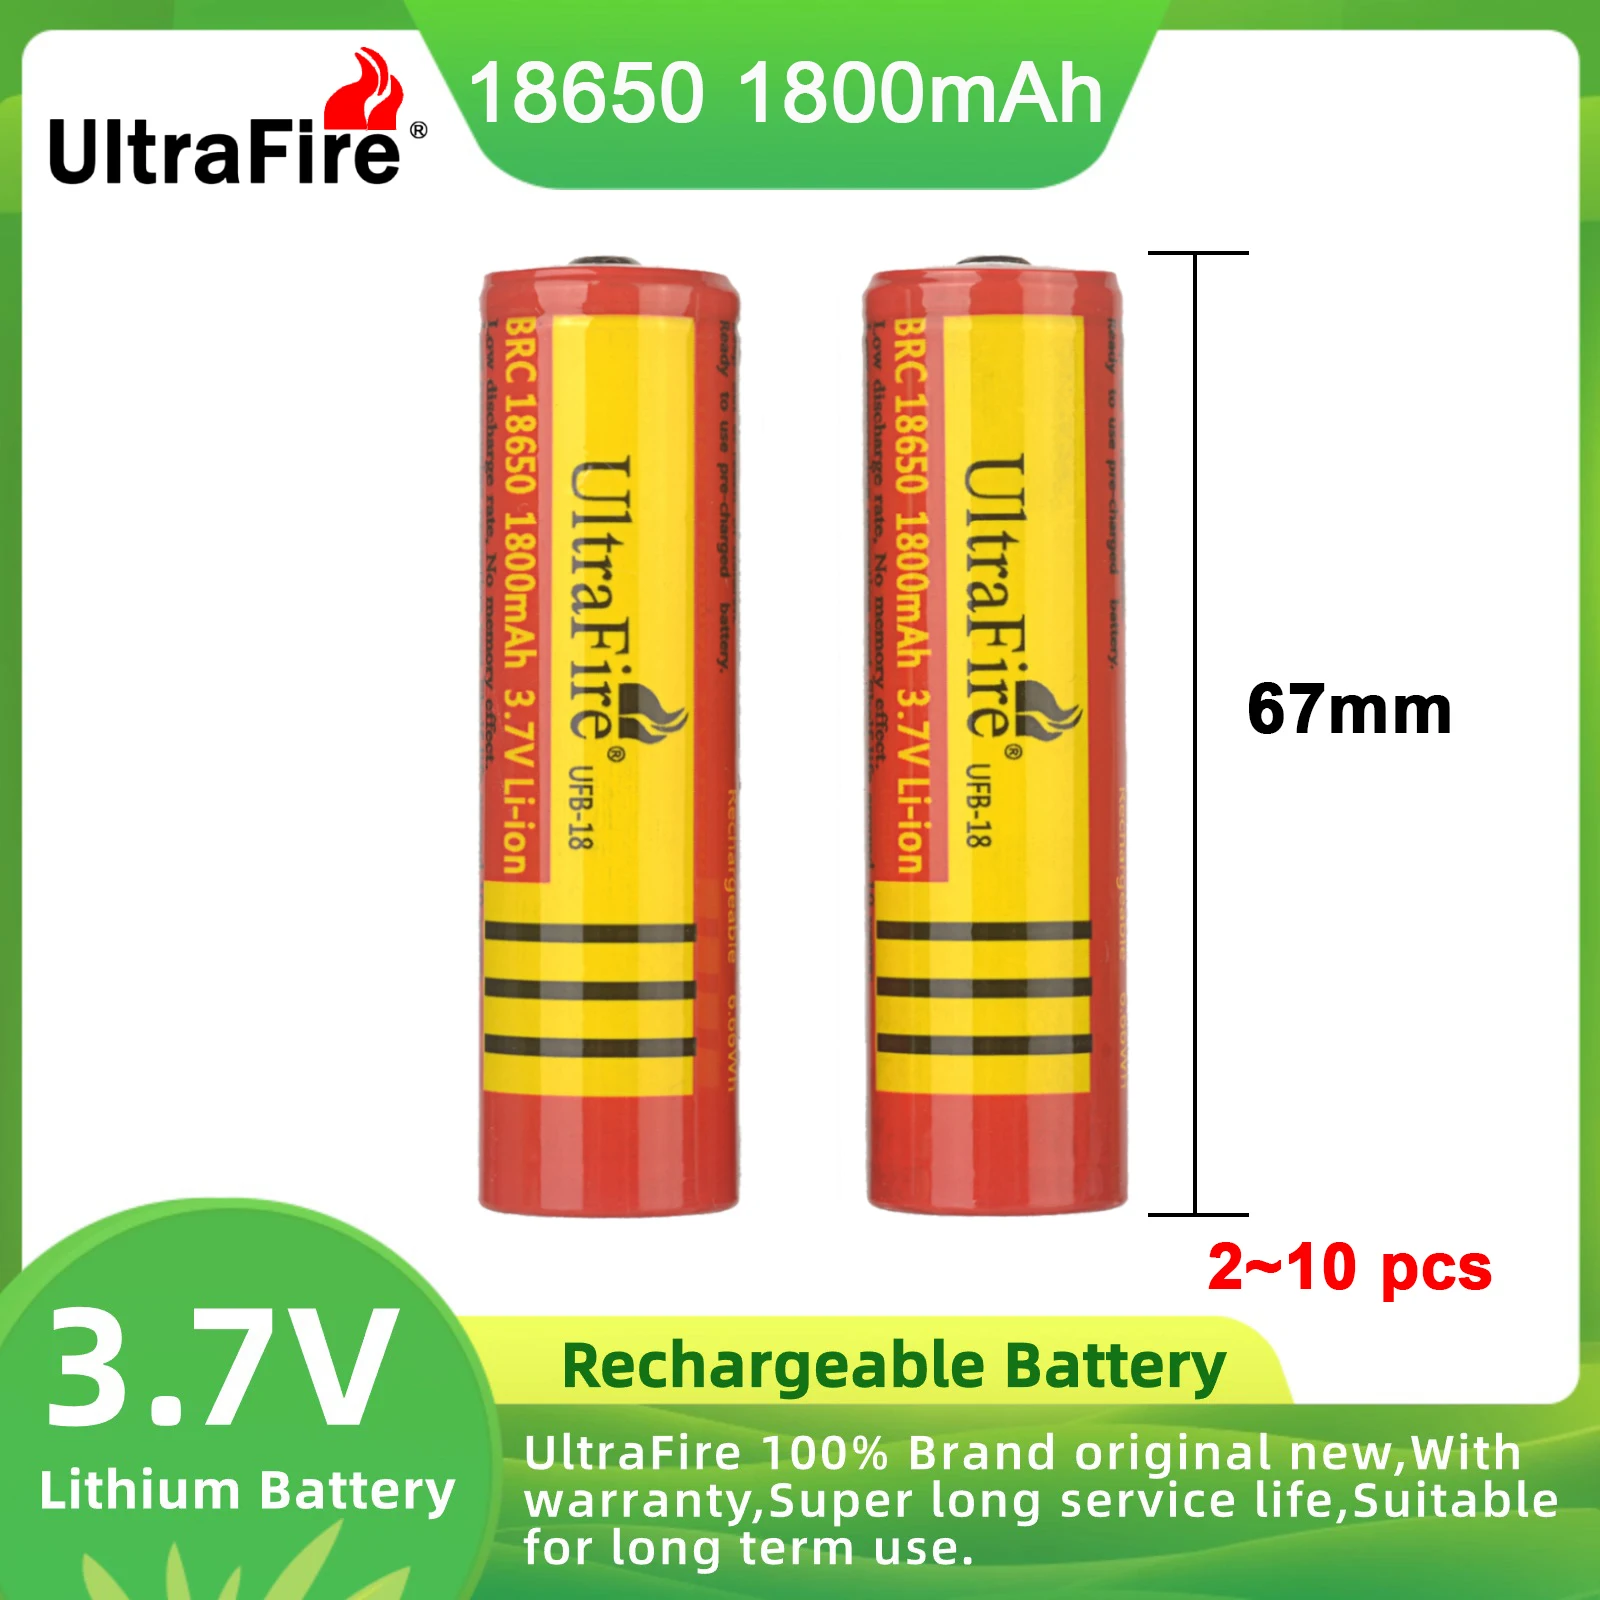 

UltraFire 18650 Li-Ion Battery 1800Mah 3.7V Rechargeable Lithium Batteries For Electri Toy Bicycle Light Headlight Flashlight